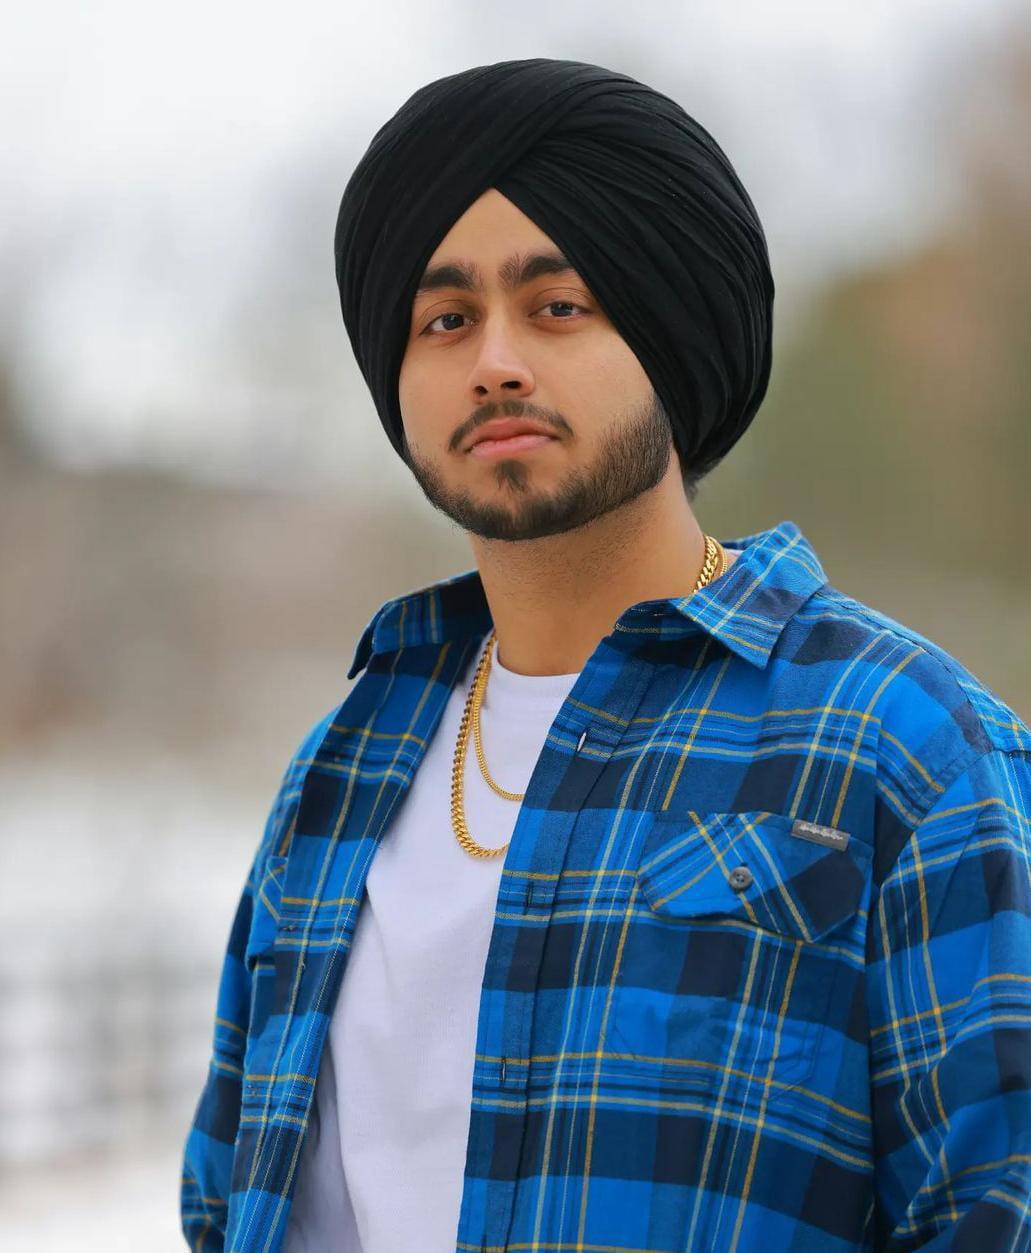 Punjabi-Canadian singer Shubh says 'disheartened by cancellation of India tour, didn't intend to hurt anyone's sentiments'